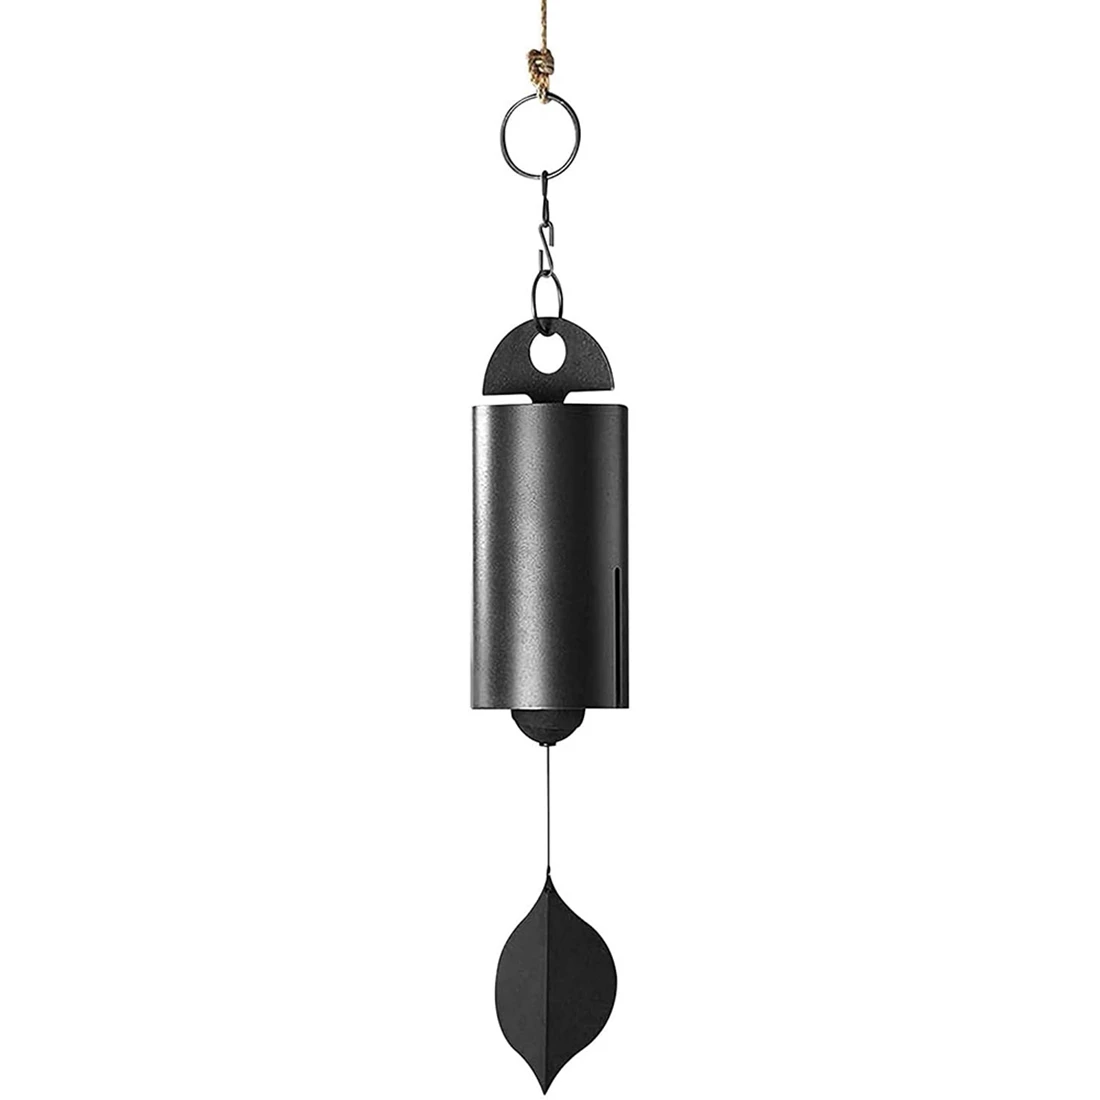 

Deep Resonance Serenity Bell Windchime - Metal Hanging Wind Chime Handcrafted Steel Bell Plays Beautifully in the Wind